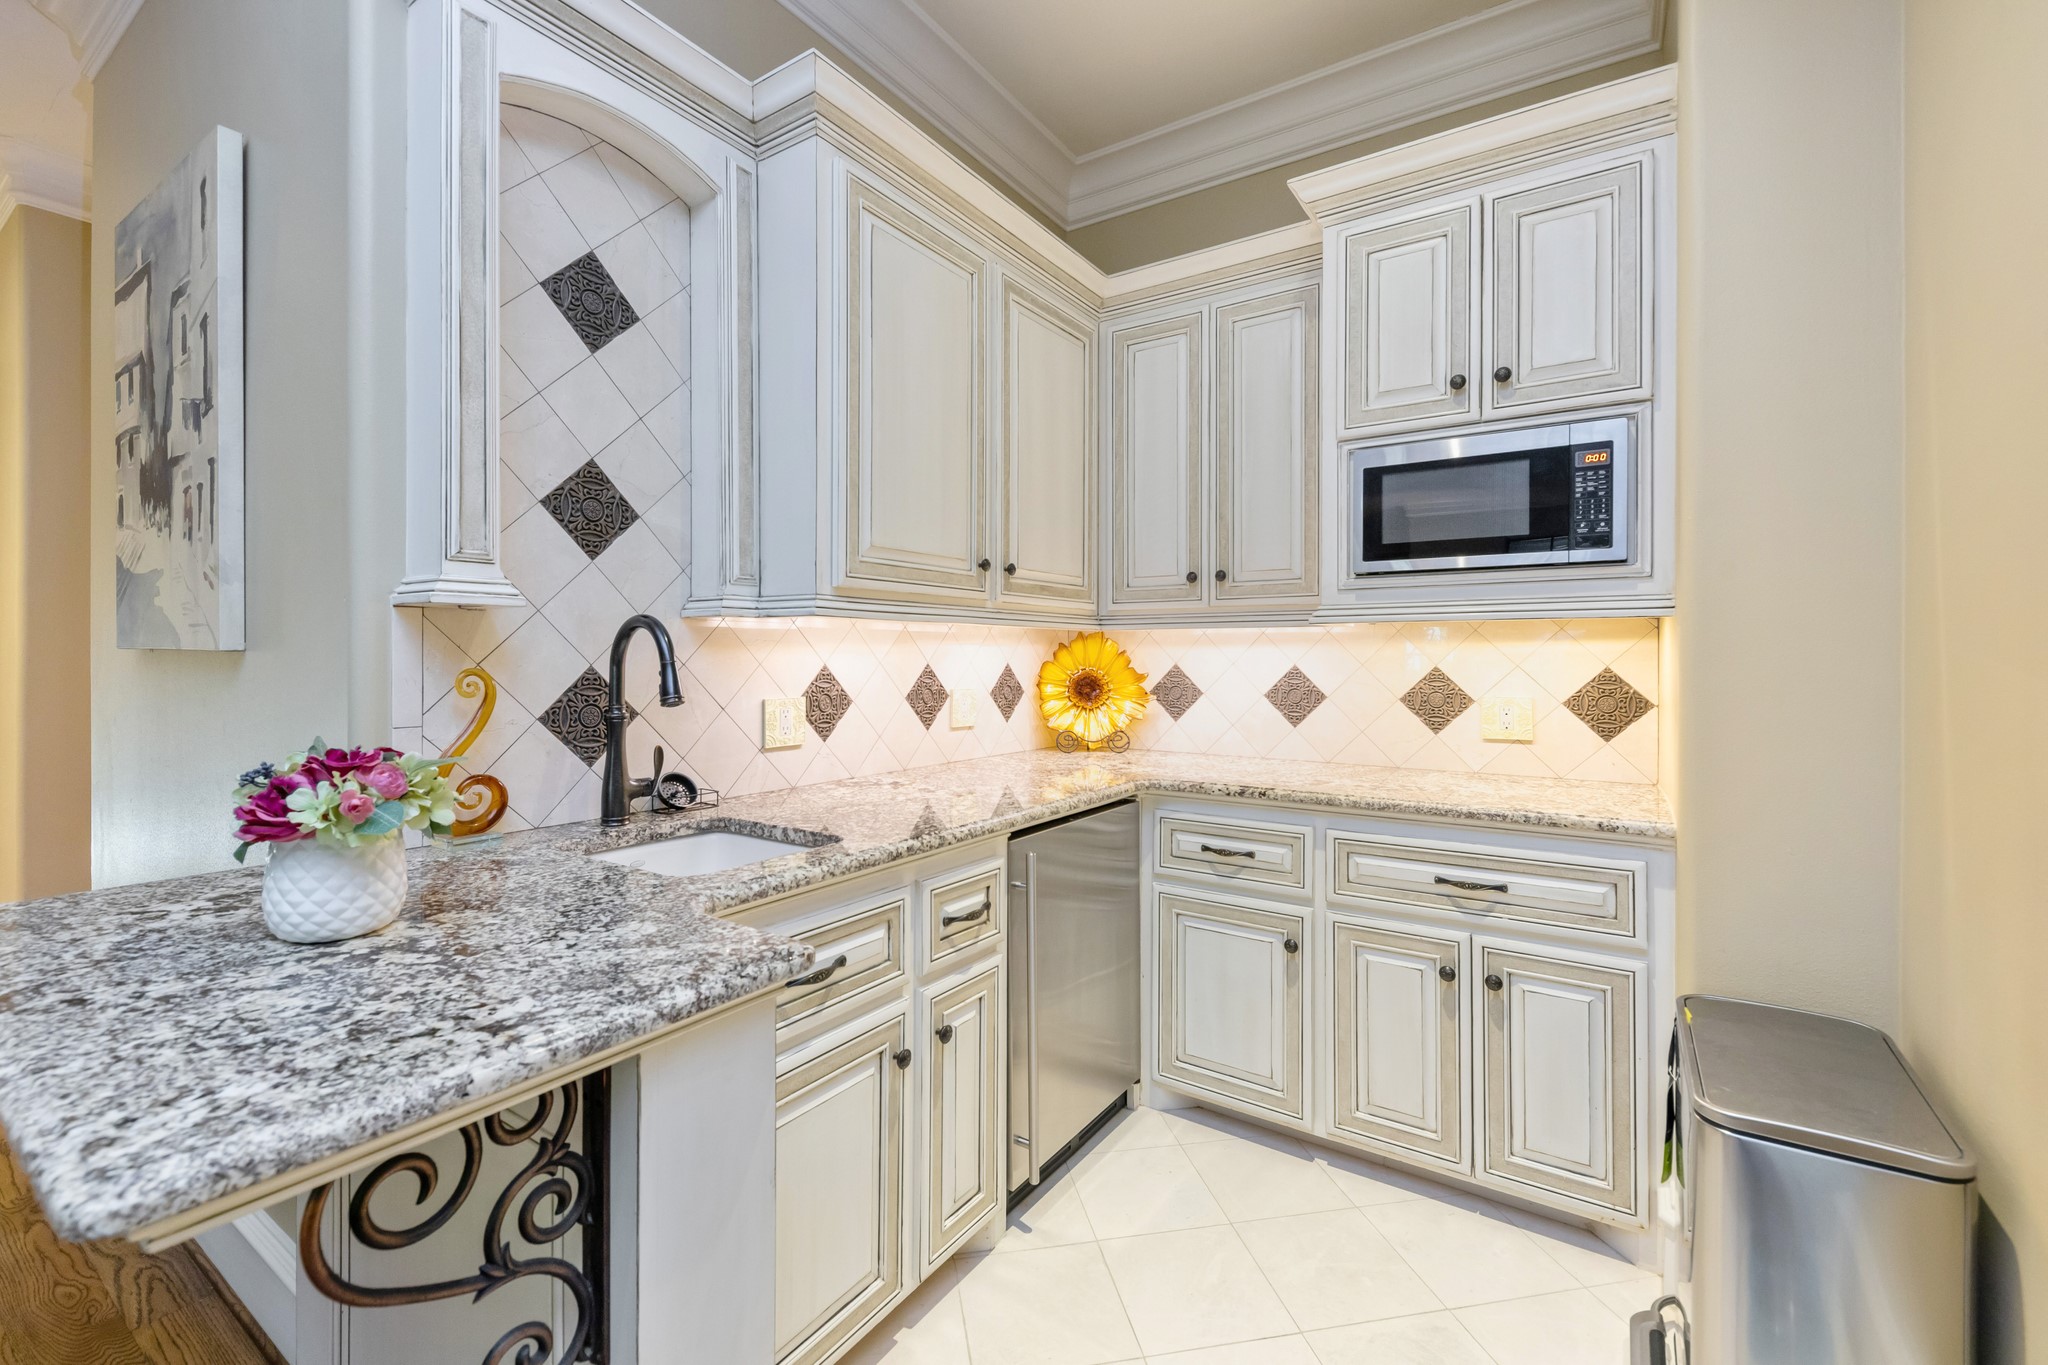 Kitchenette has granite countertops, mini fridge, sink, and microwave as well as custom cabinetry.